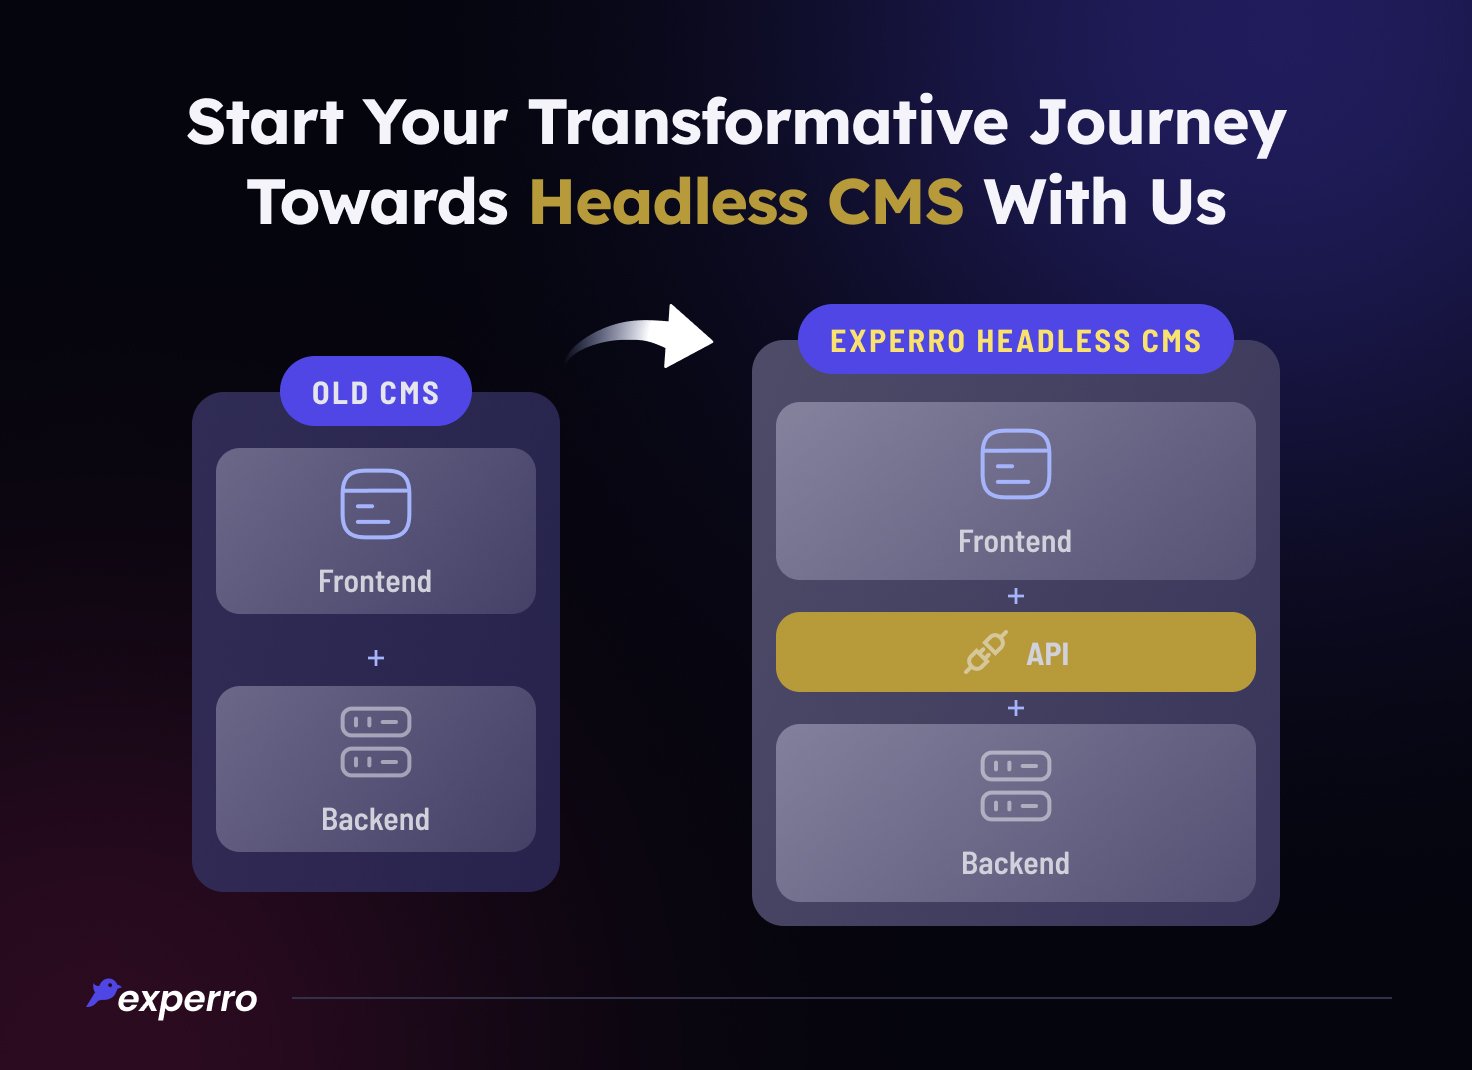 Start your Transformation to Headless with Experro